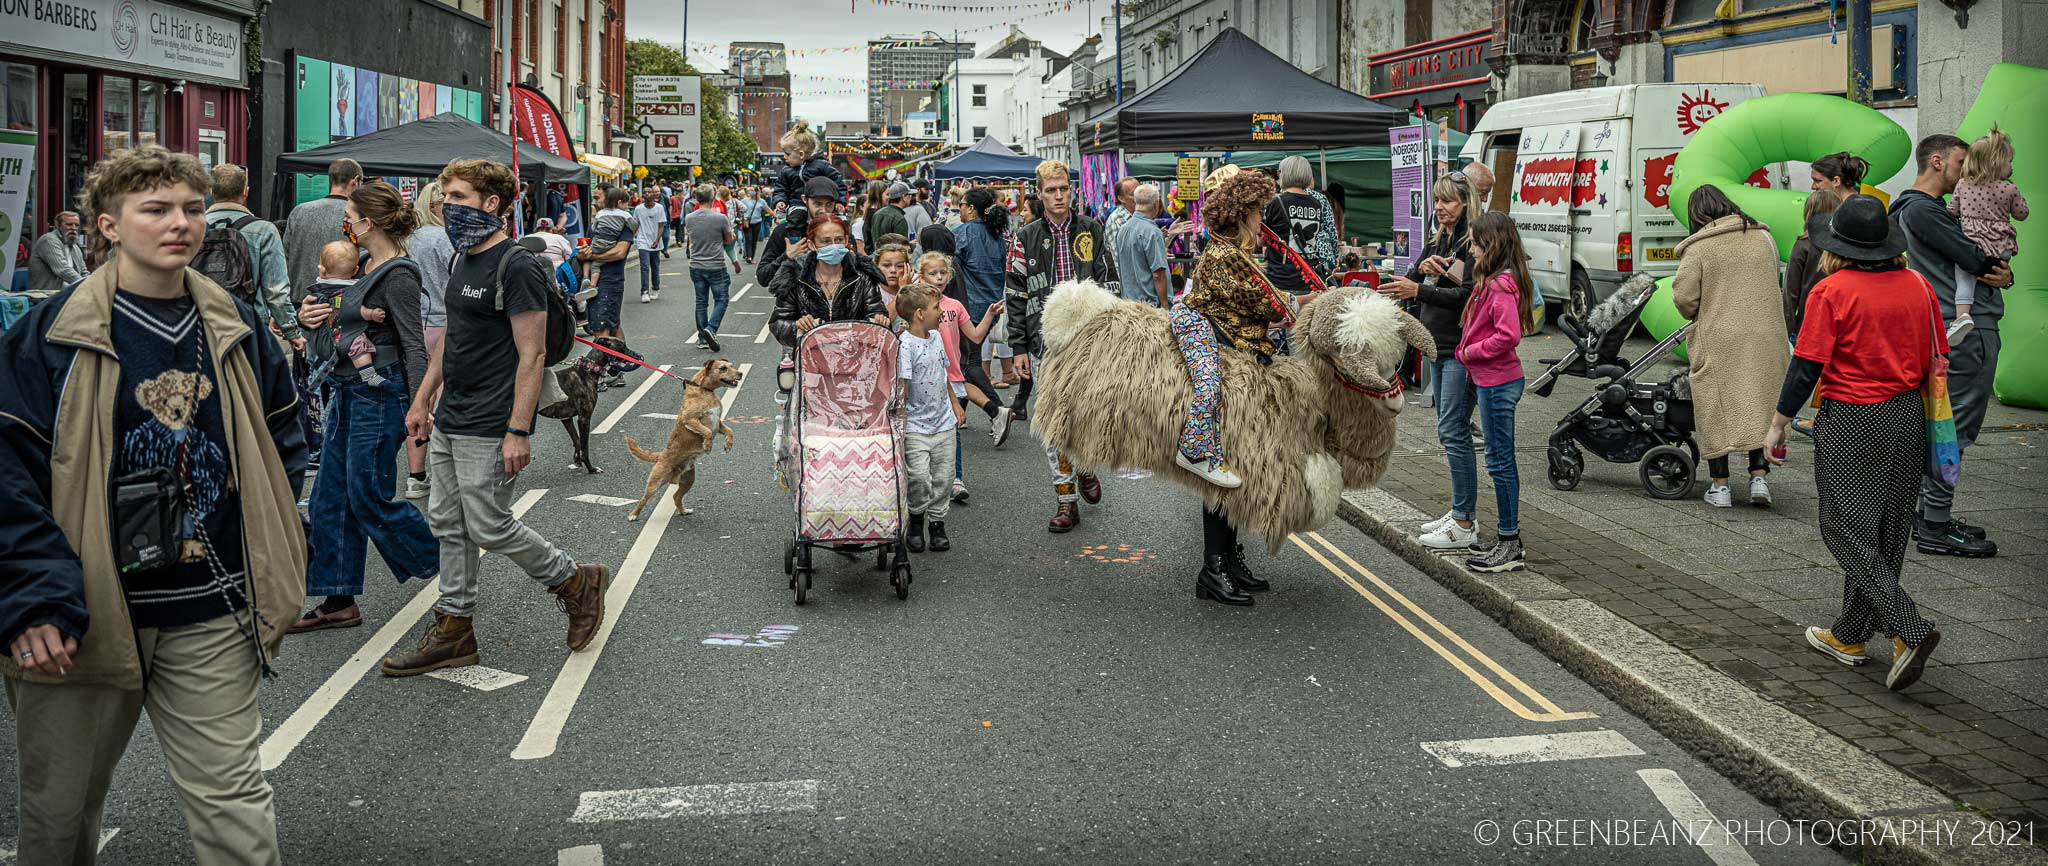 Plymouth's Union Street Party 2021